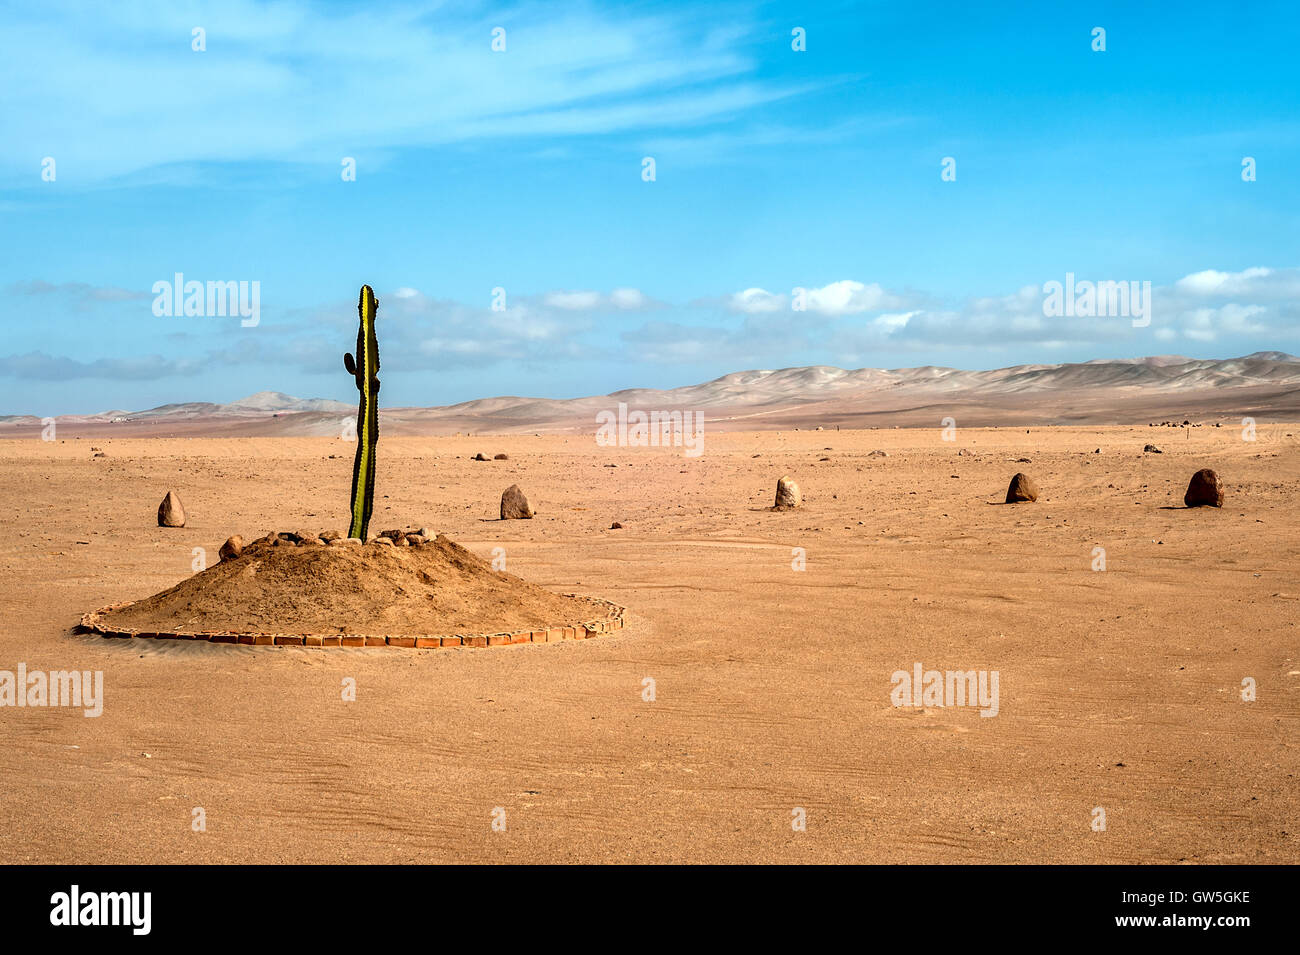 The only plant for many kilometers in the desert region of Tacna, Peru Stock Photo